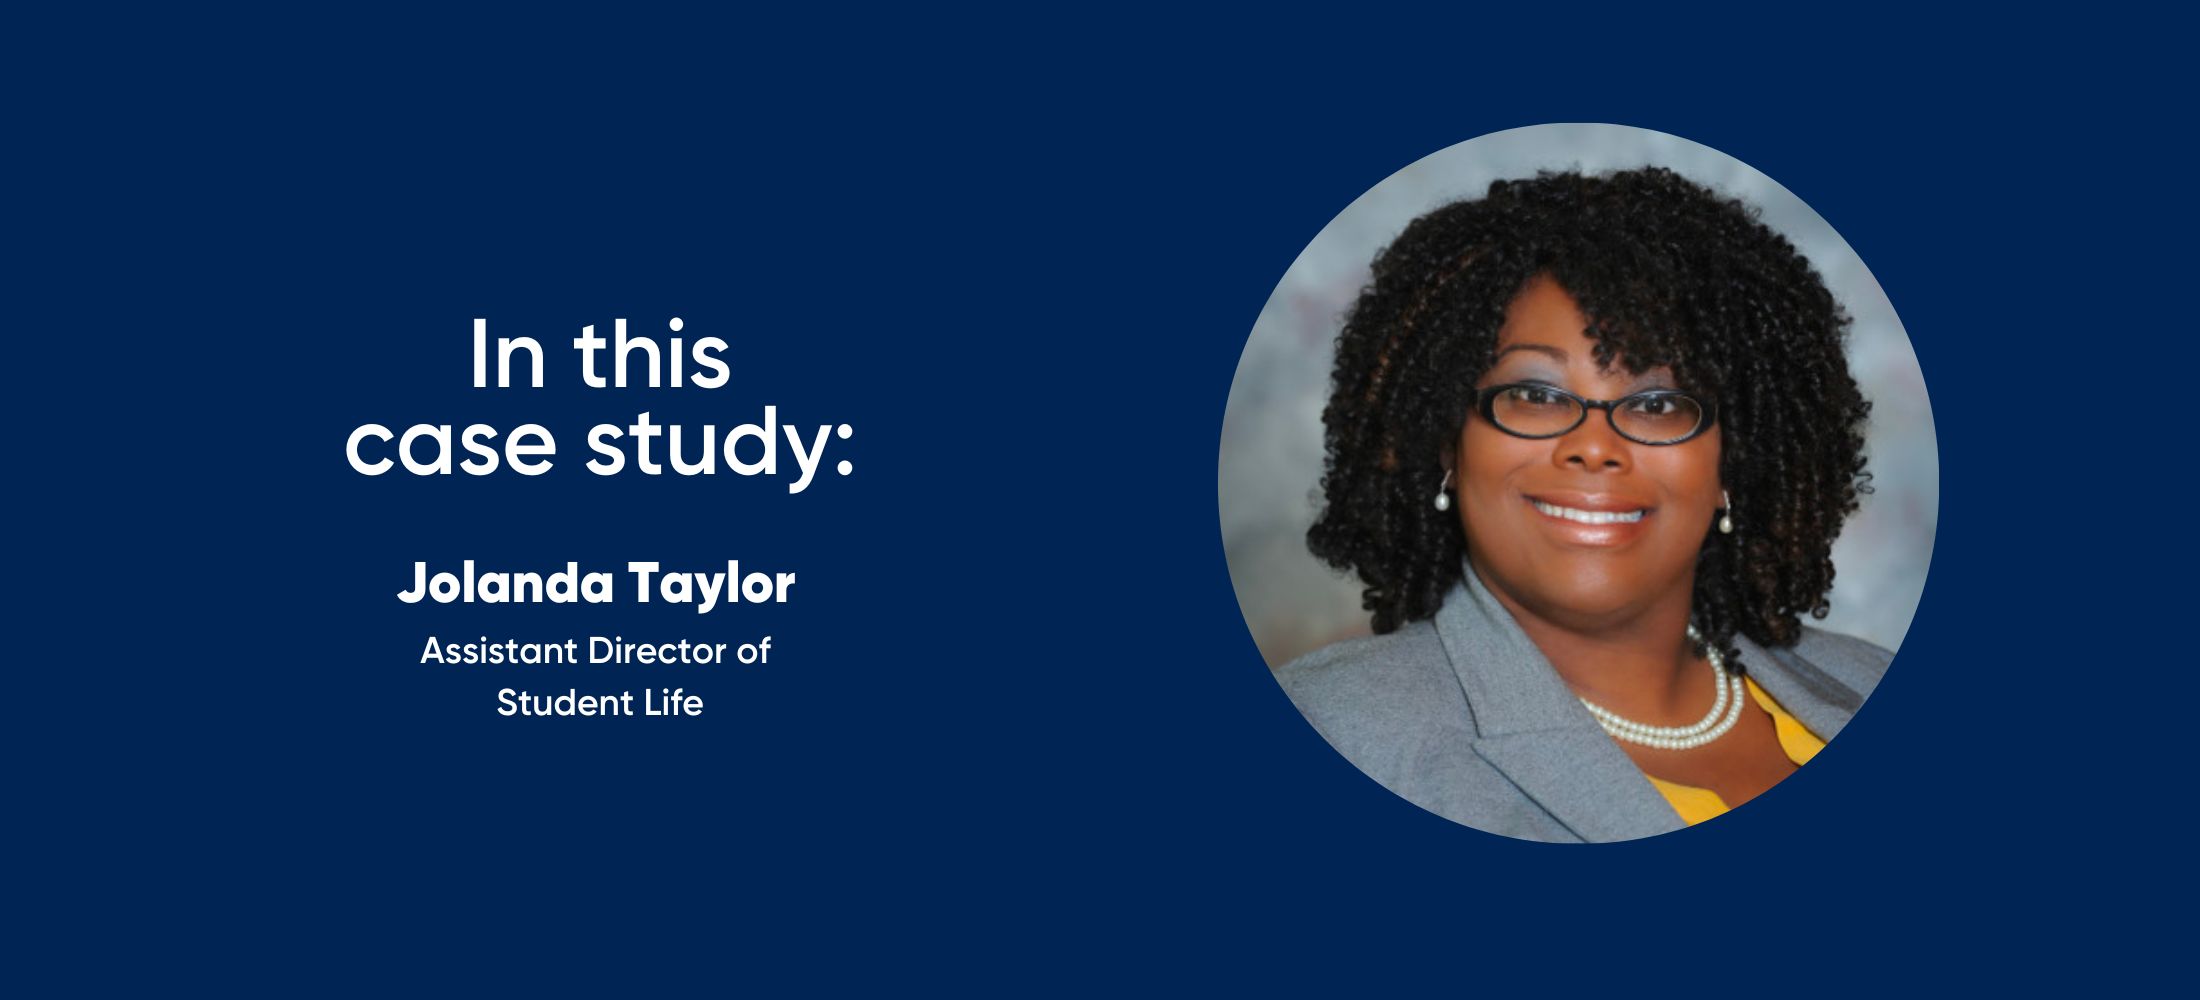 in this case study: Jolanda Taylor, assistant director for student life